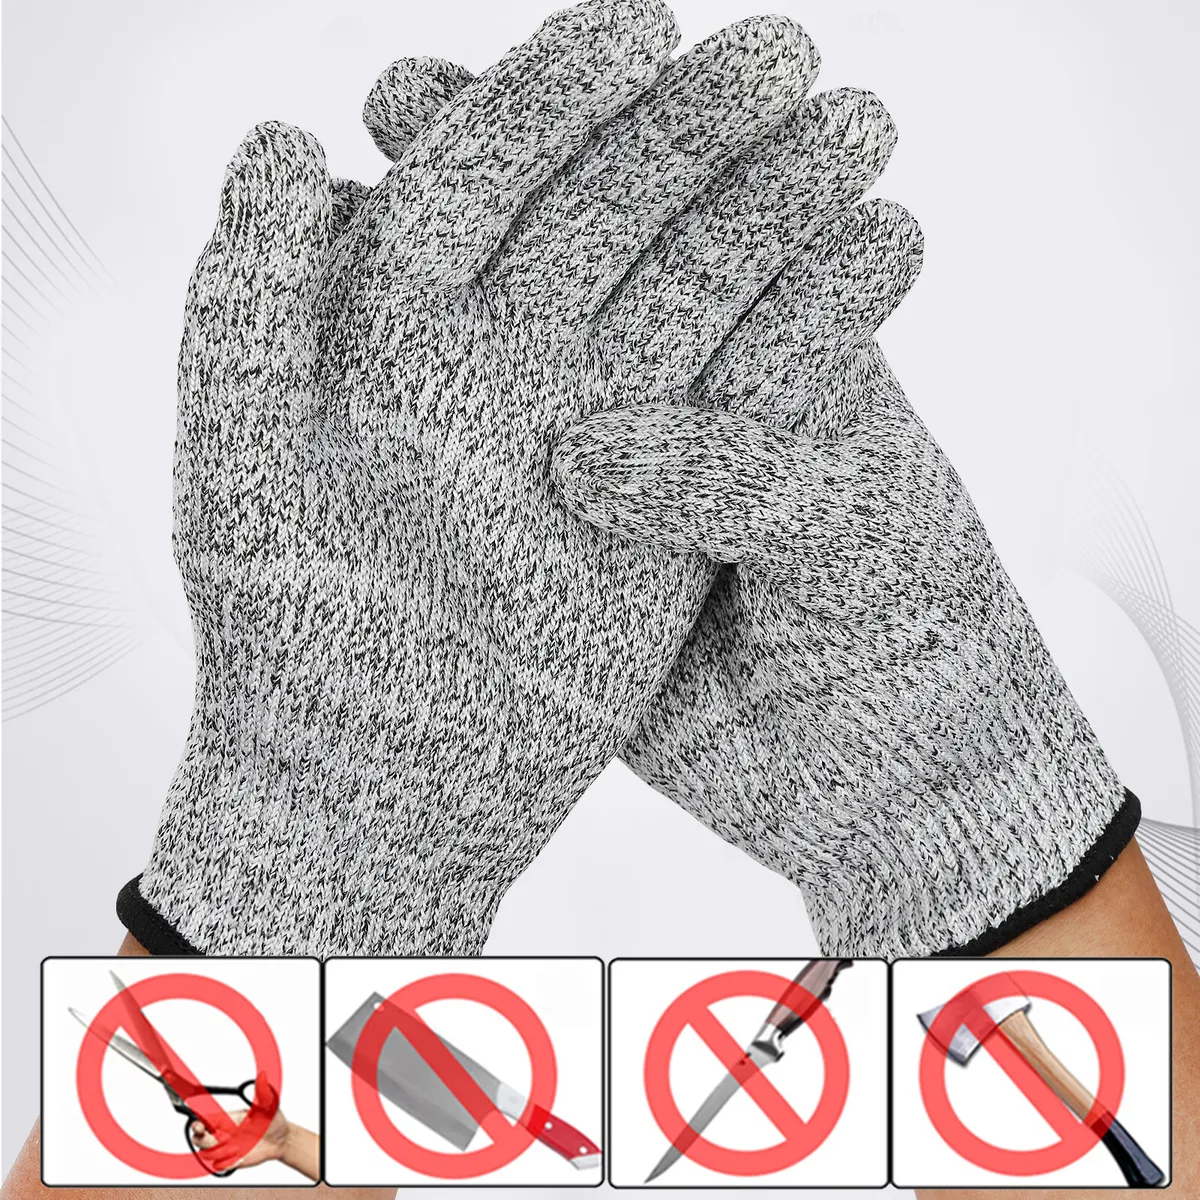 Protective Cut Resistant Gloves Meat Wood Carving Gloves Kitchen